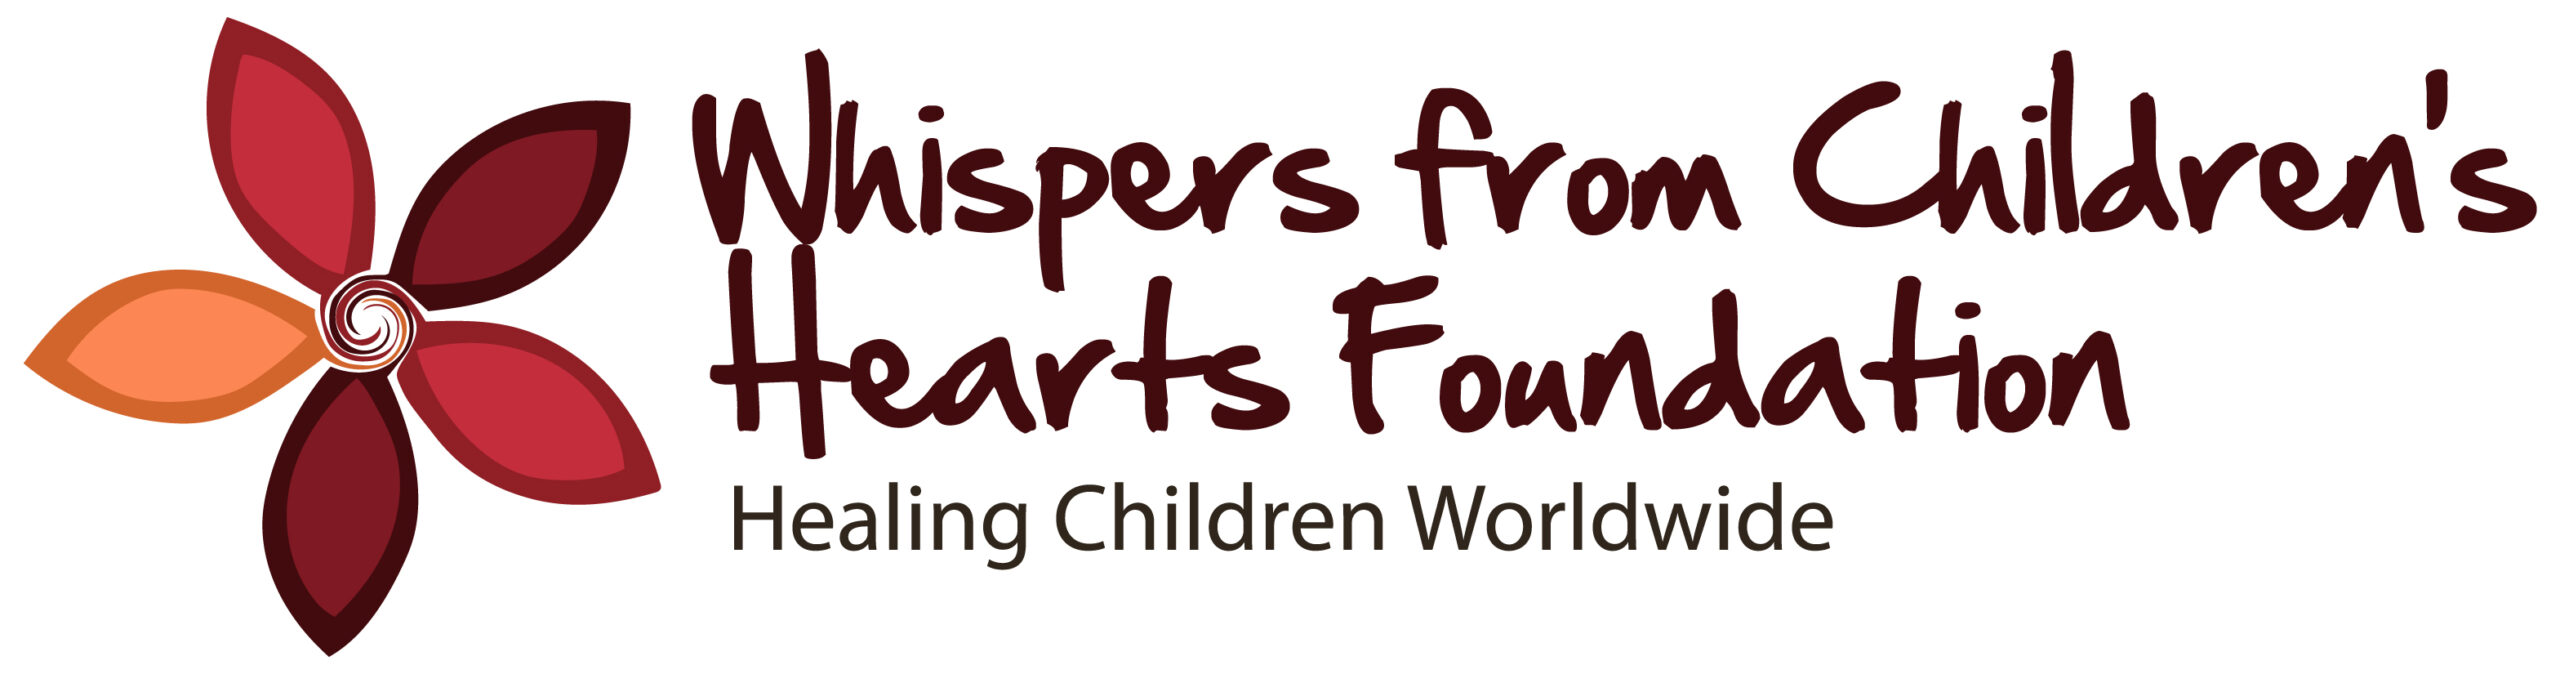 Whispers From Childrens Hearts Foundation